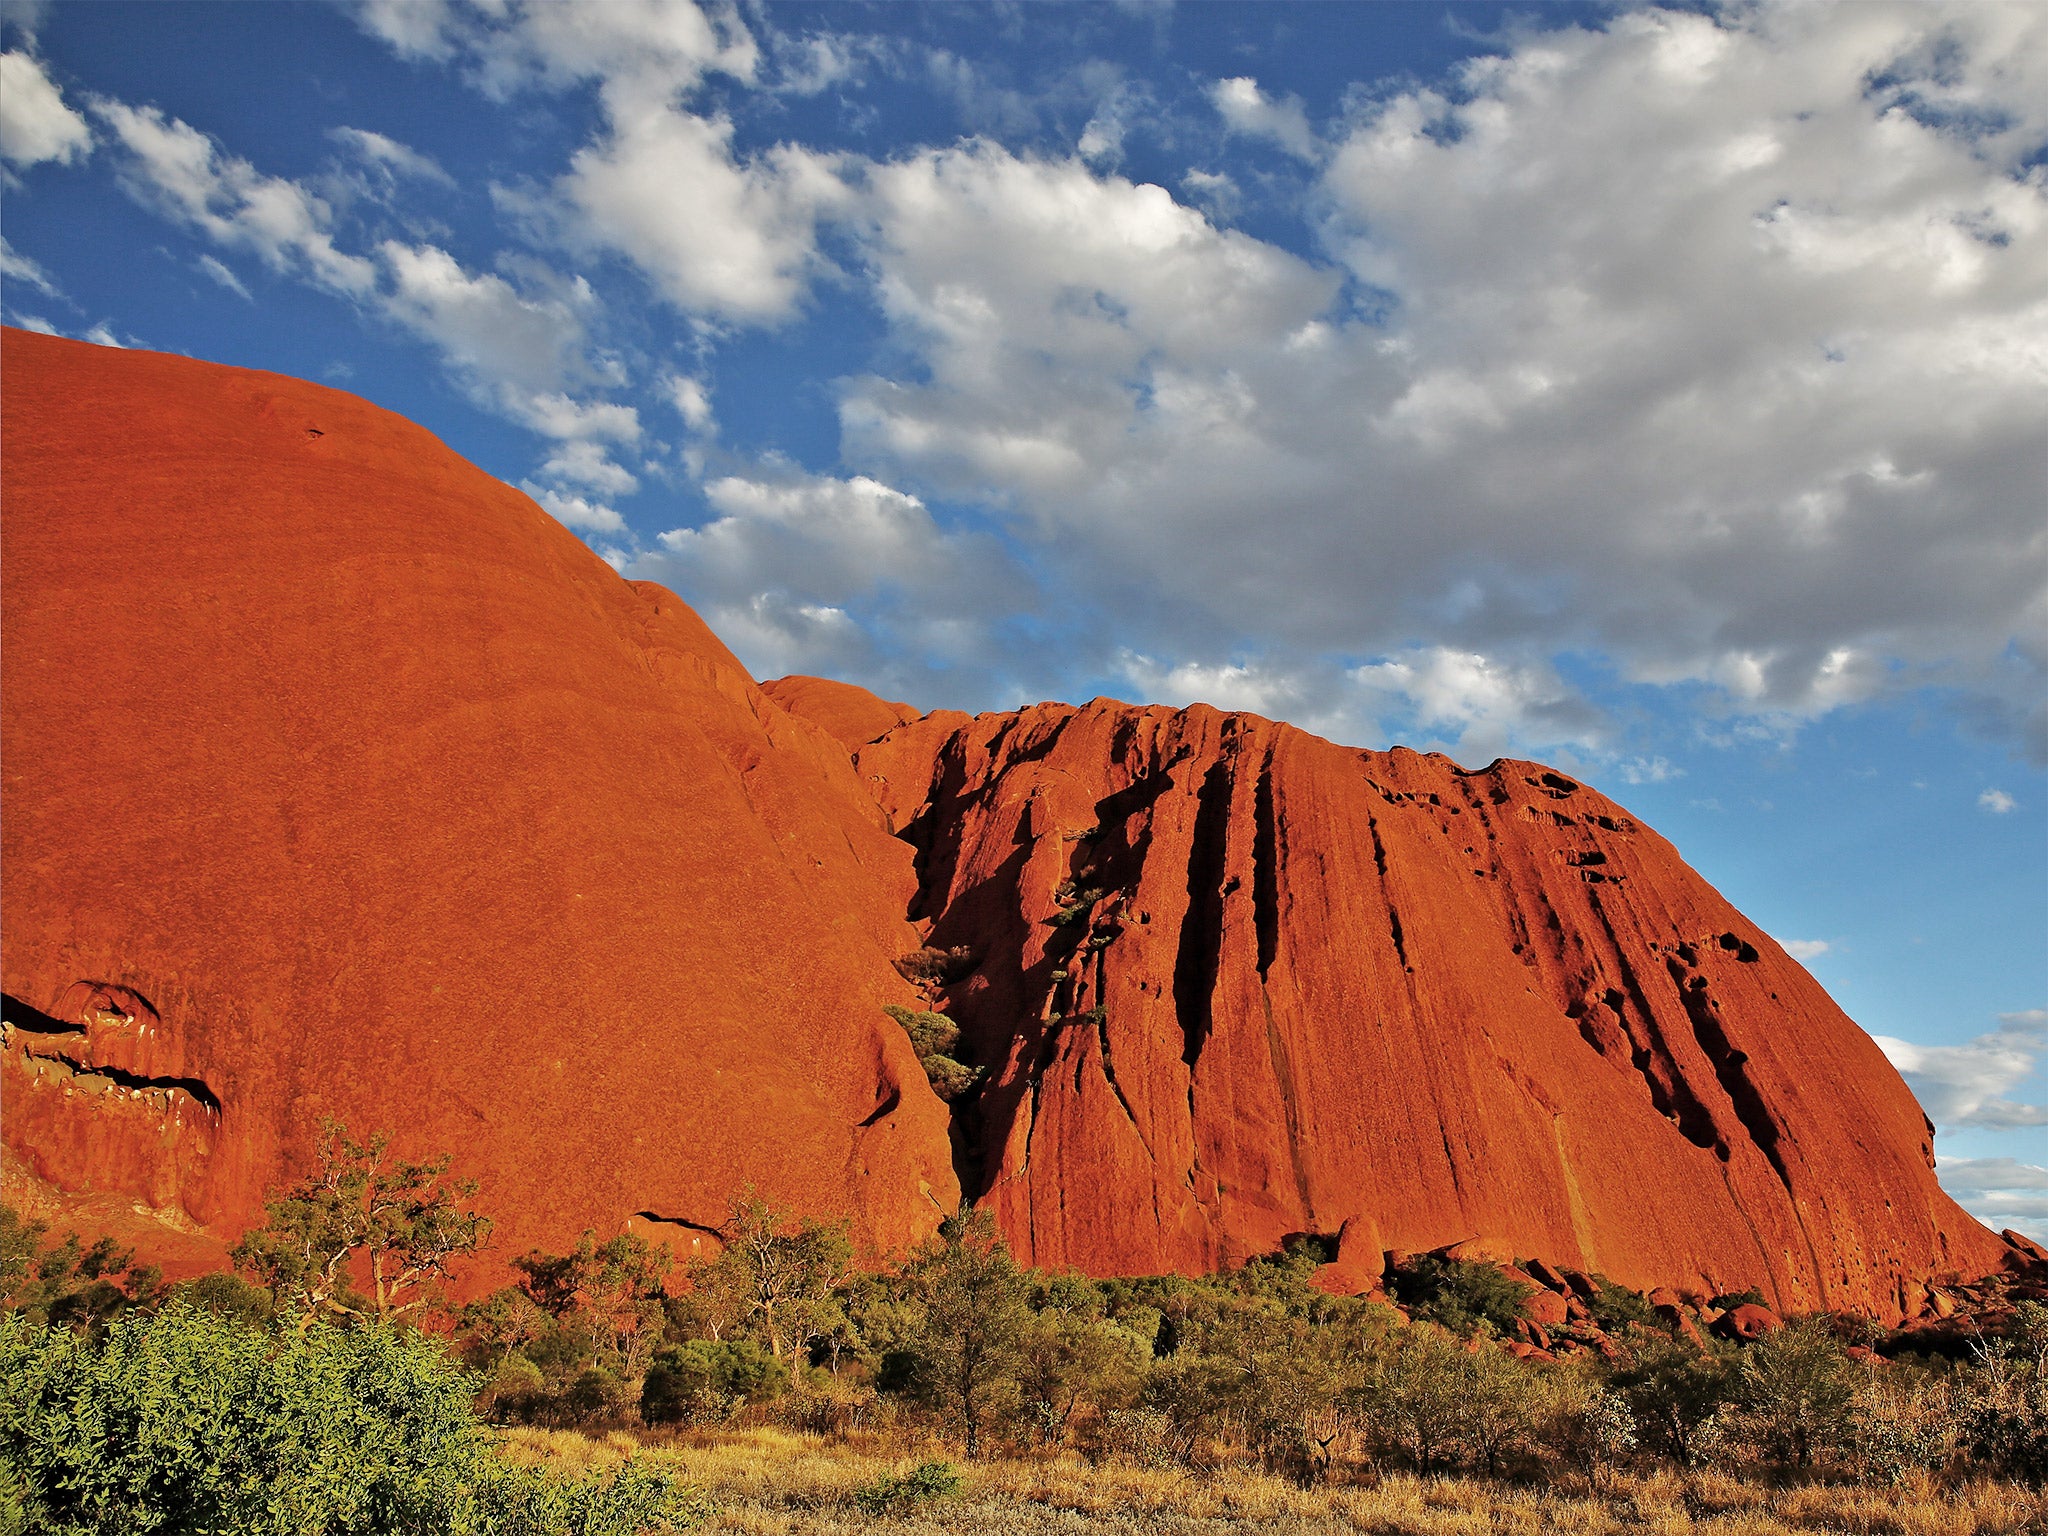 Uluru, formerly Ayers Rock, used to be visited by over 250,000 people each year